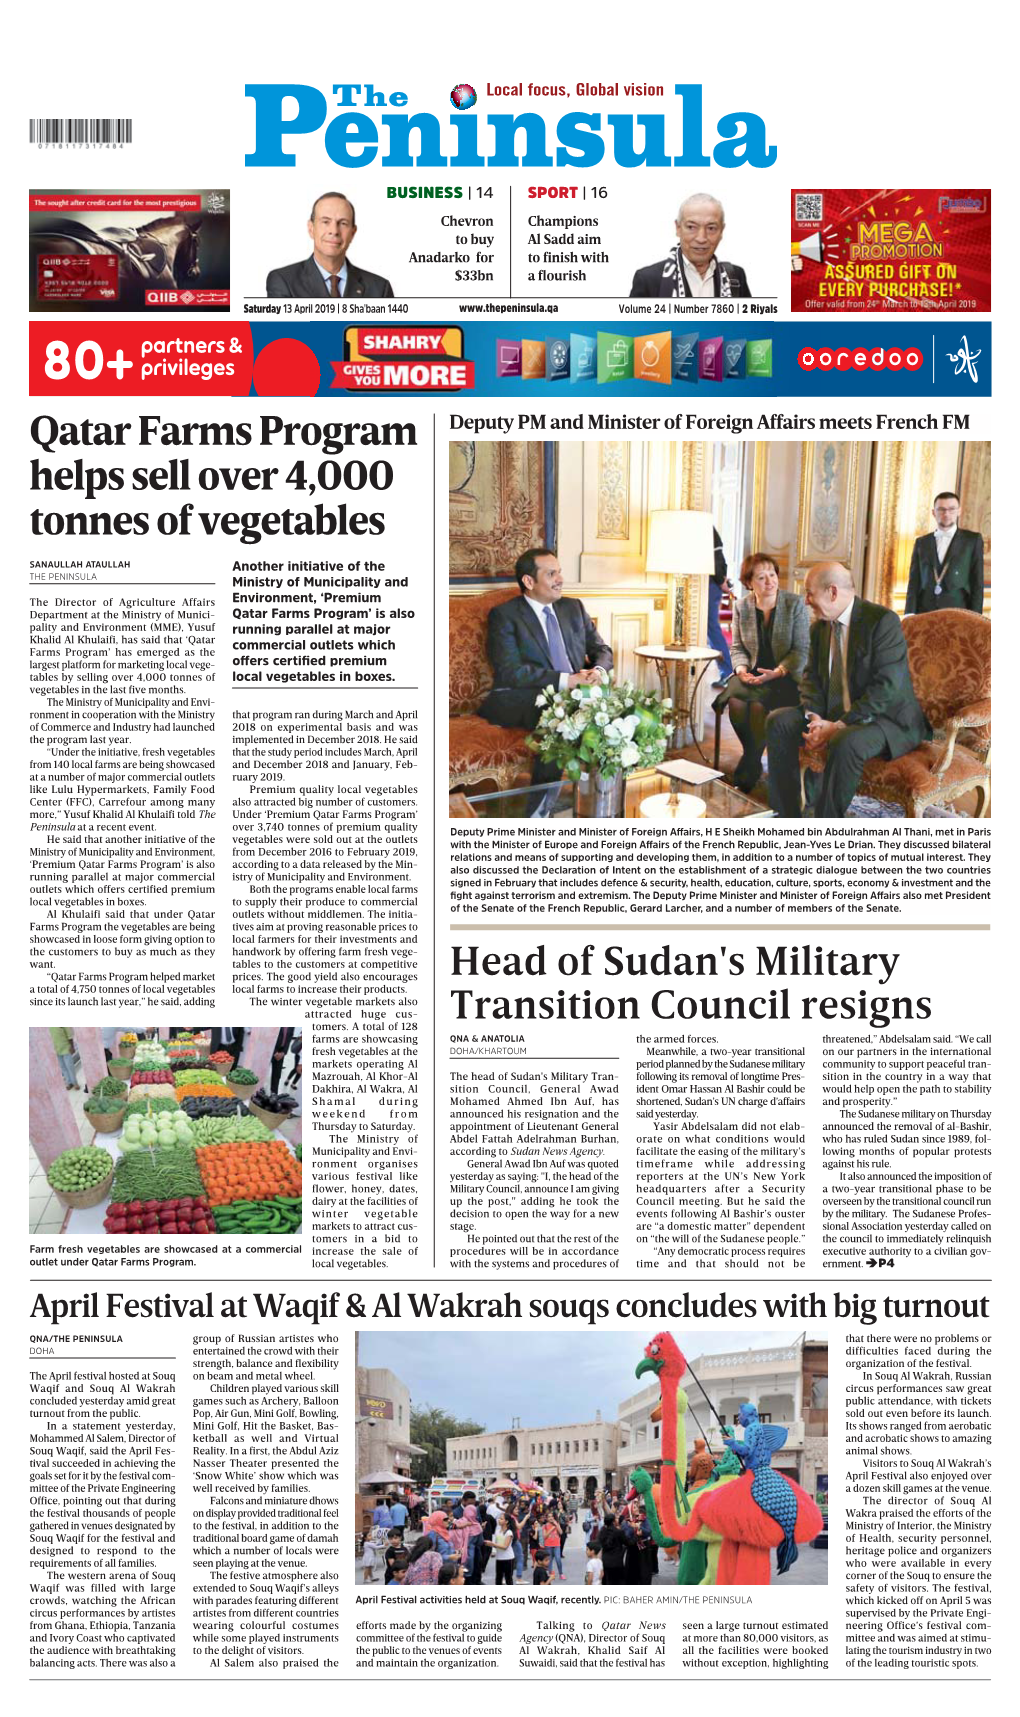 Qatar Farms Program Helps Sell Over 4,000 Tonnes of Vegetables